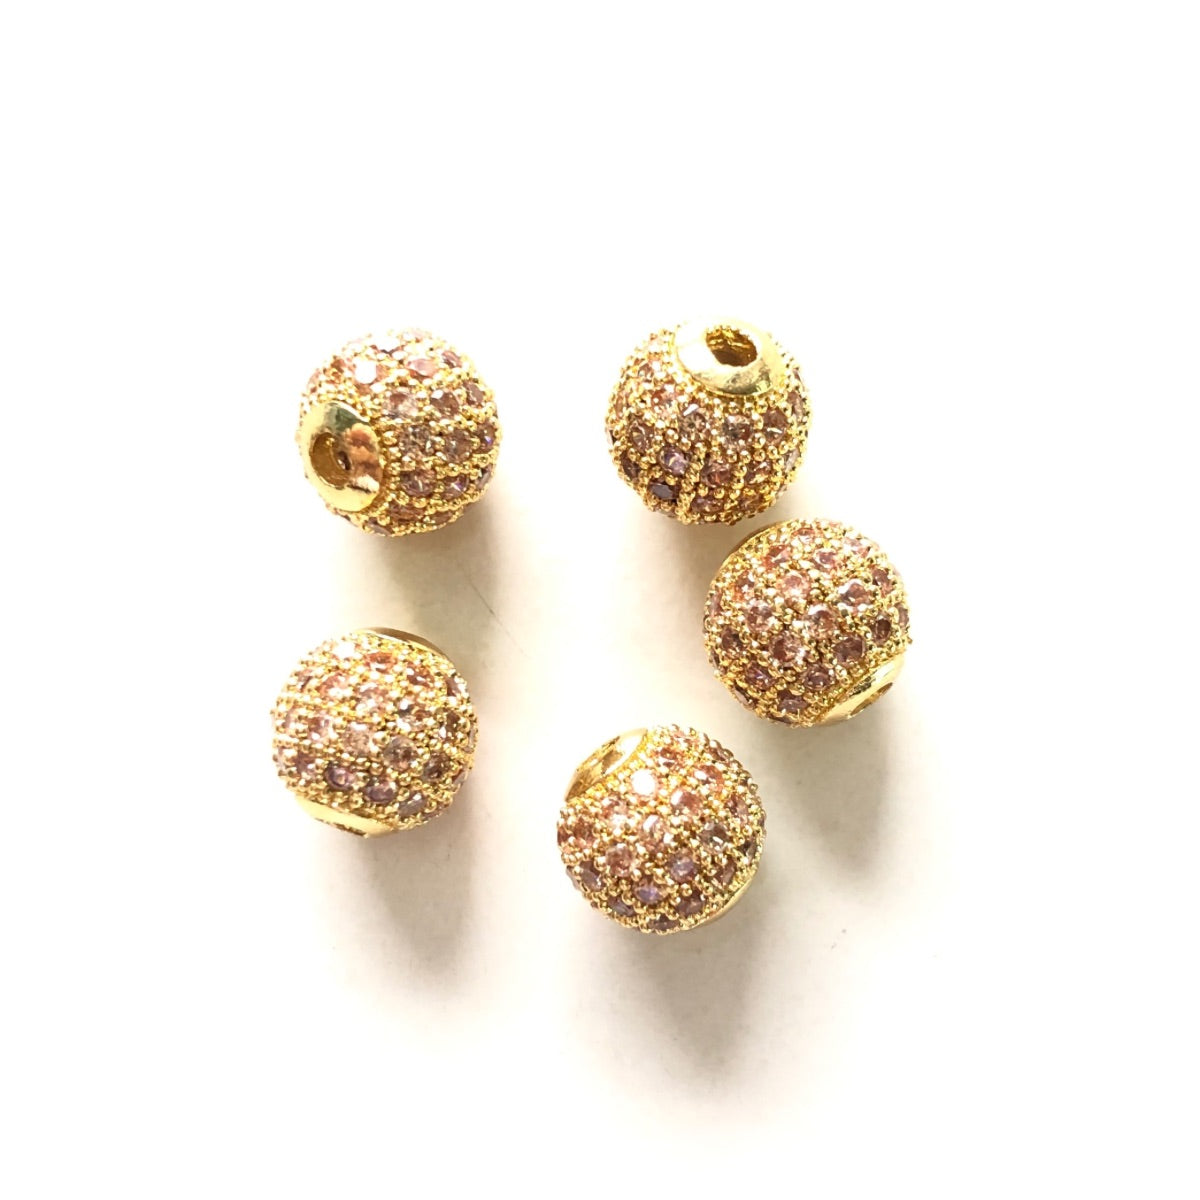 10pcs/lot 6mm, 8mm Colorful CZ Paved Ball Spacers Gold Champange CZ Paved Spacers 6mm Beads 8mm Beads Ball Beads Colorful Zirconia New Spacers Arrivals Charms Beads Beyond